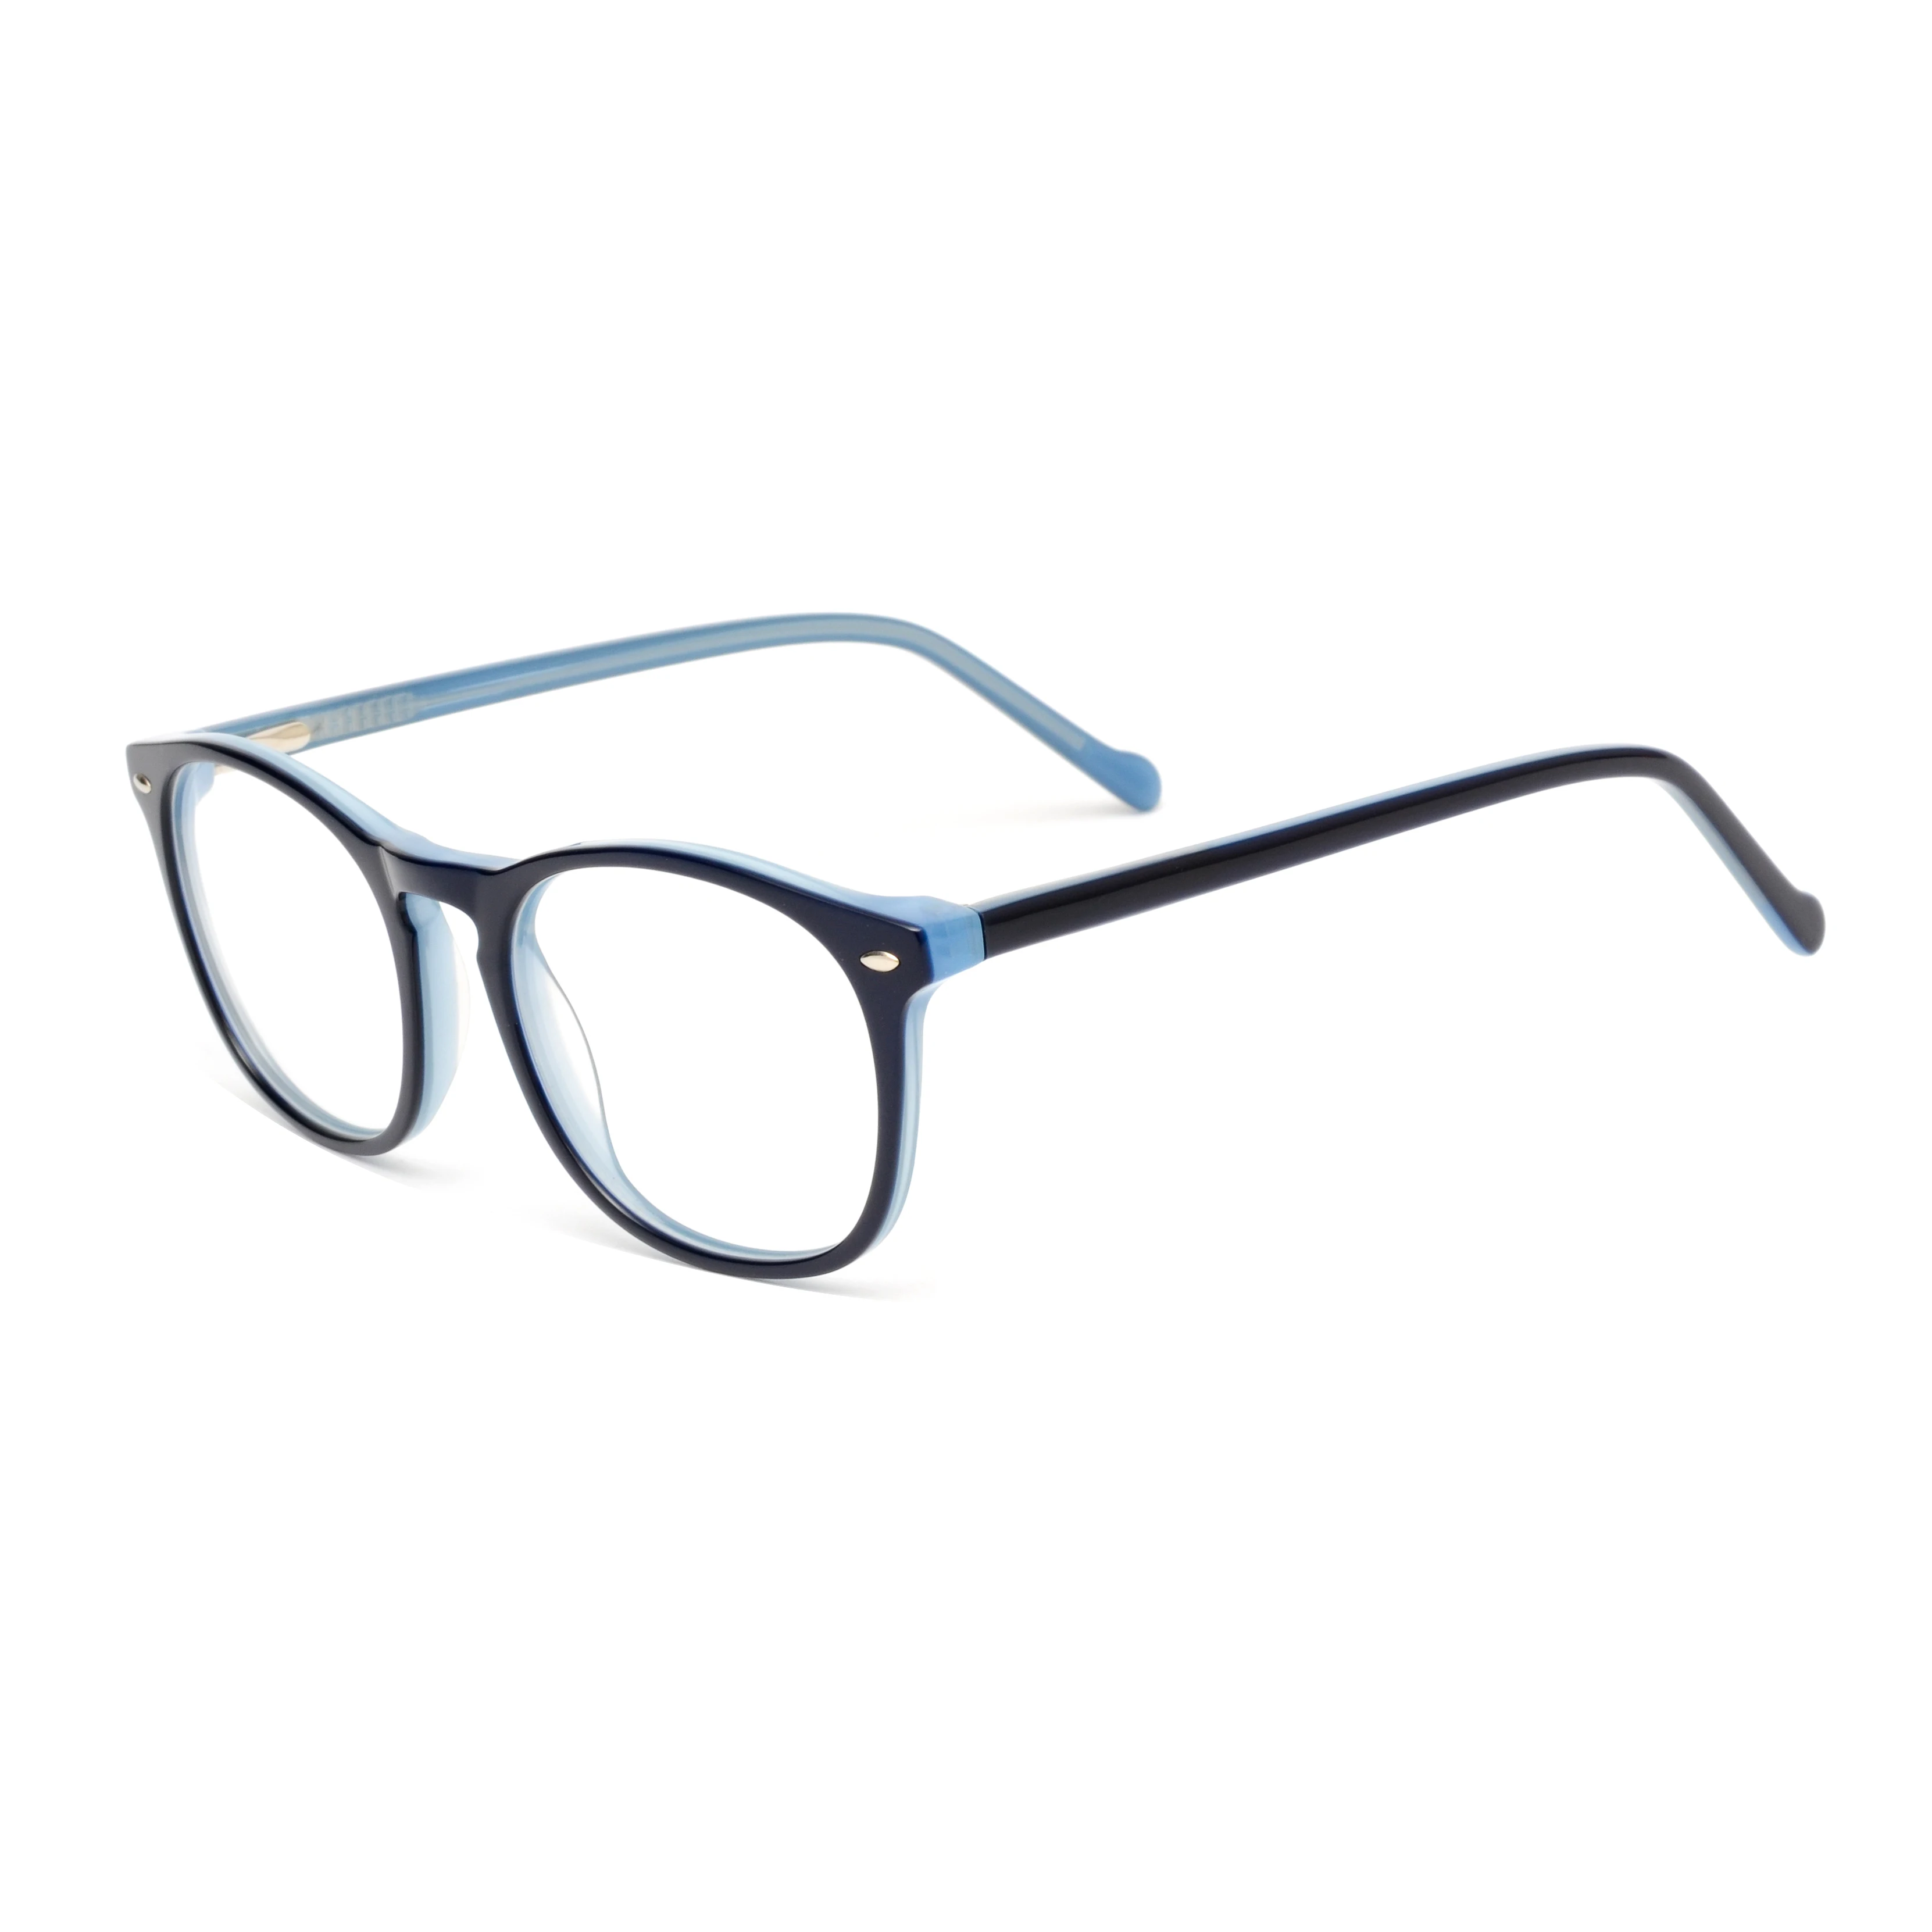 

Brand Vintage Eyewear Import Prices from China Manufacture Glasses 1110 Acetate Oversized Women Acetate Frame Glasses,acetate, As picture or custom colors